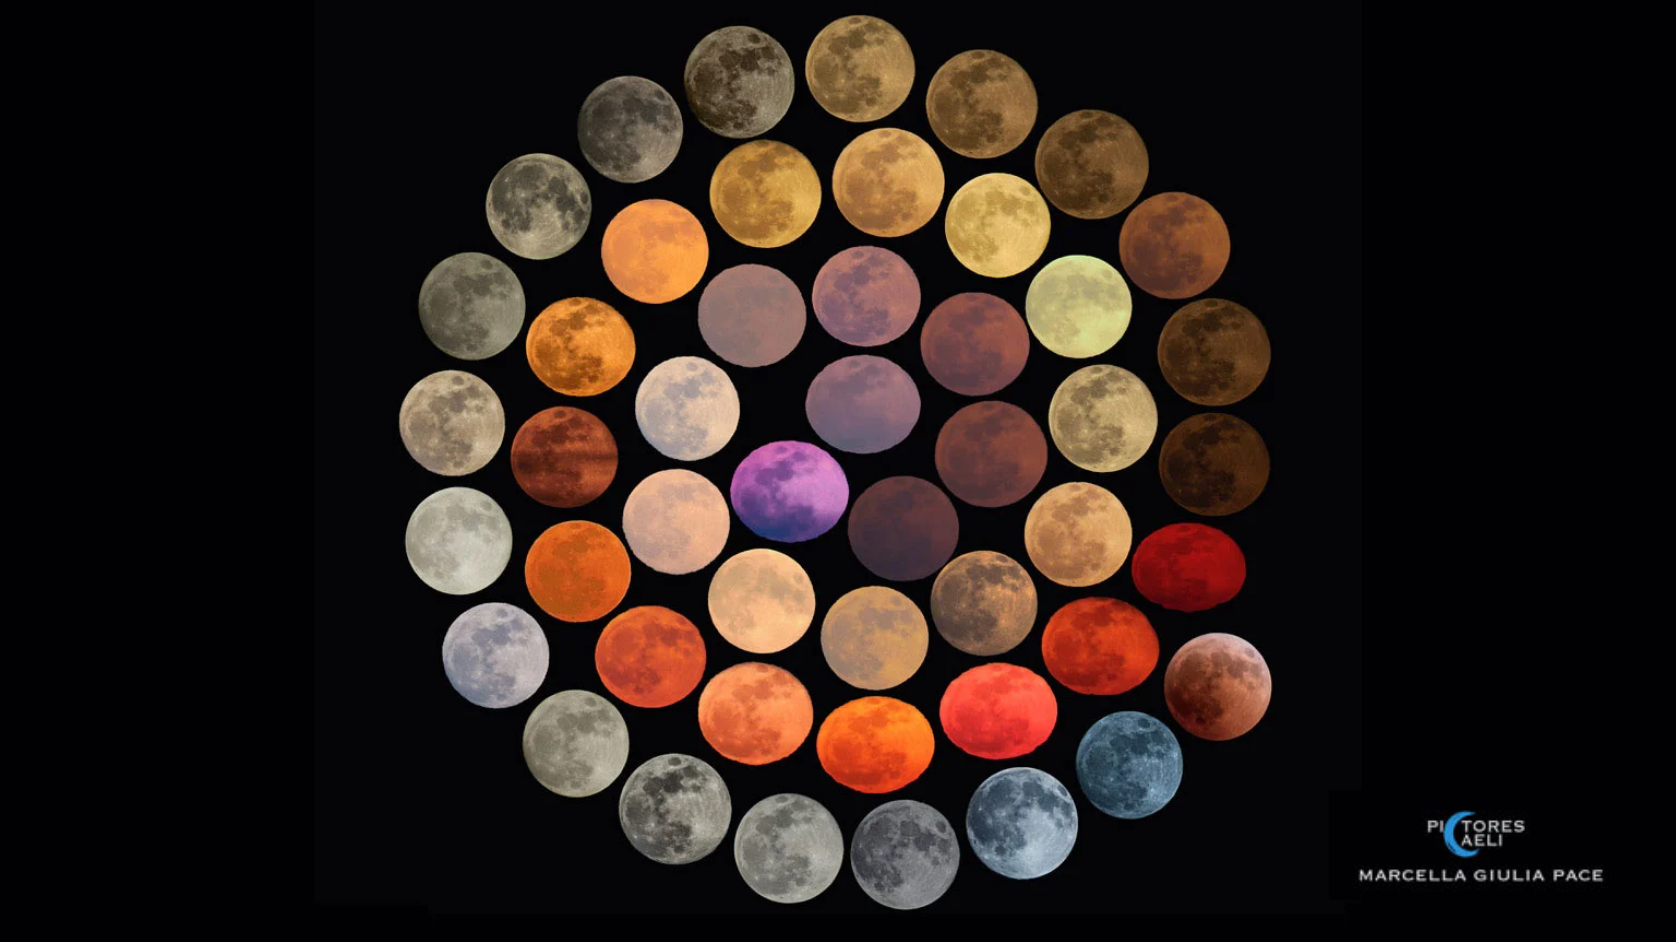 Our Multi-Colored Moon